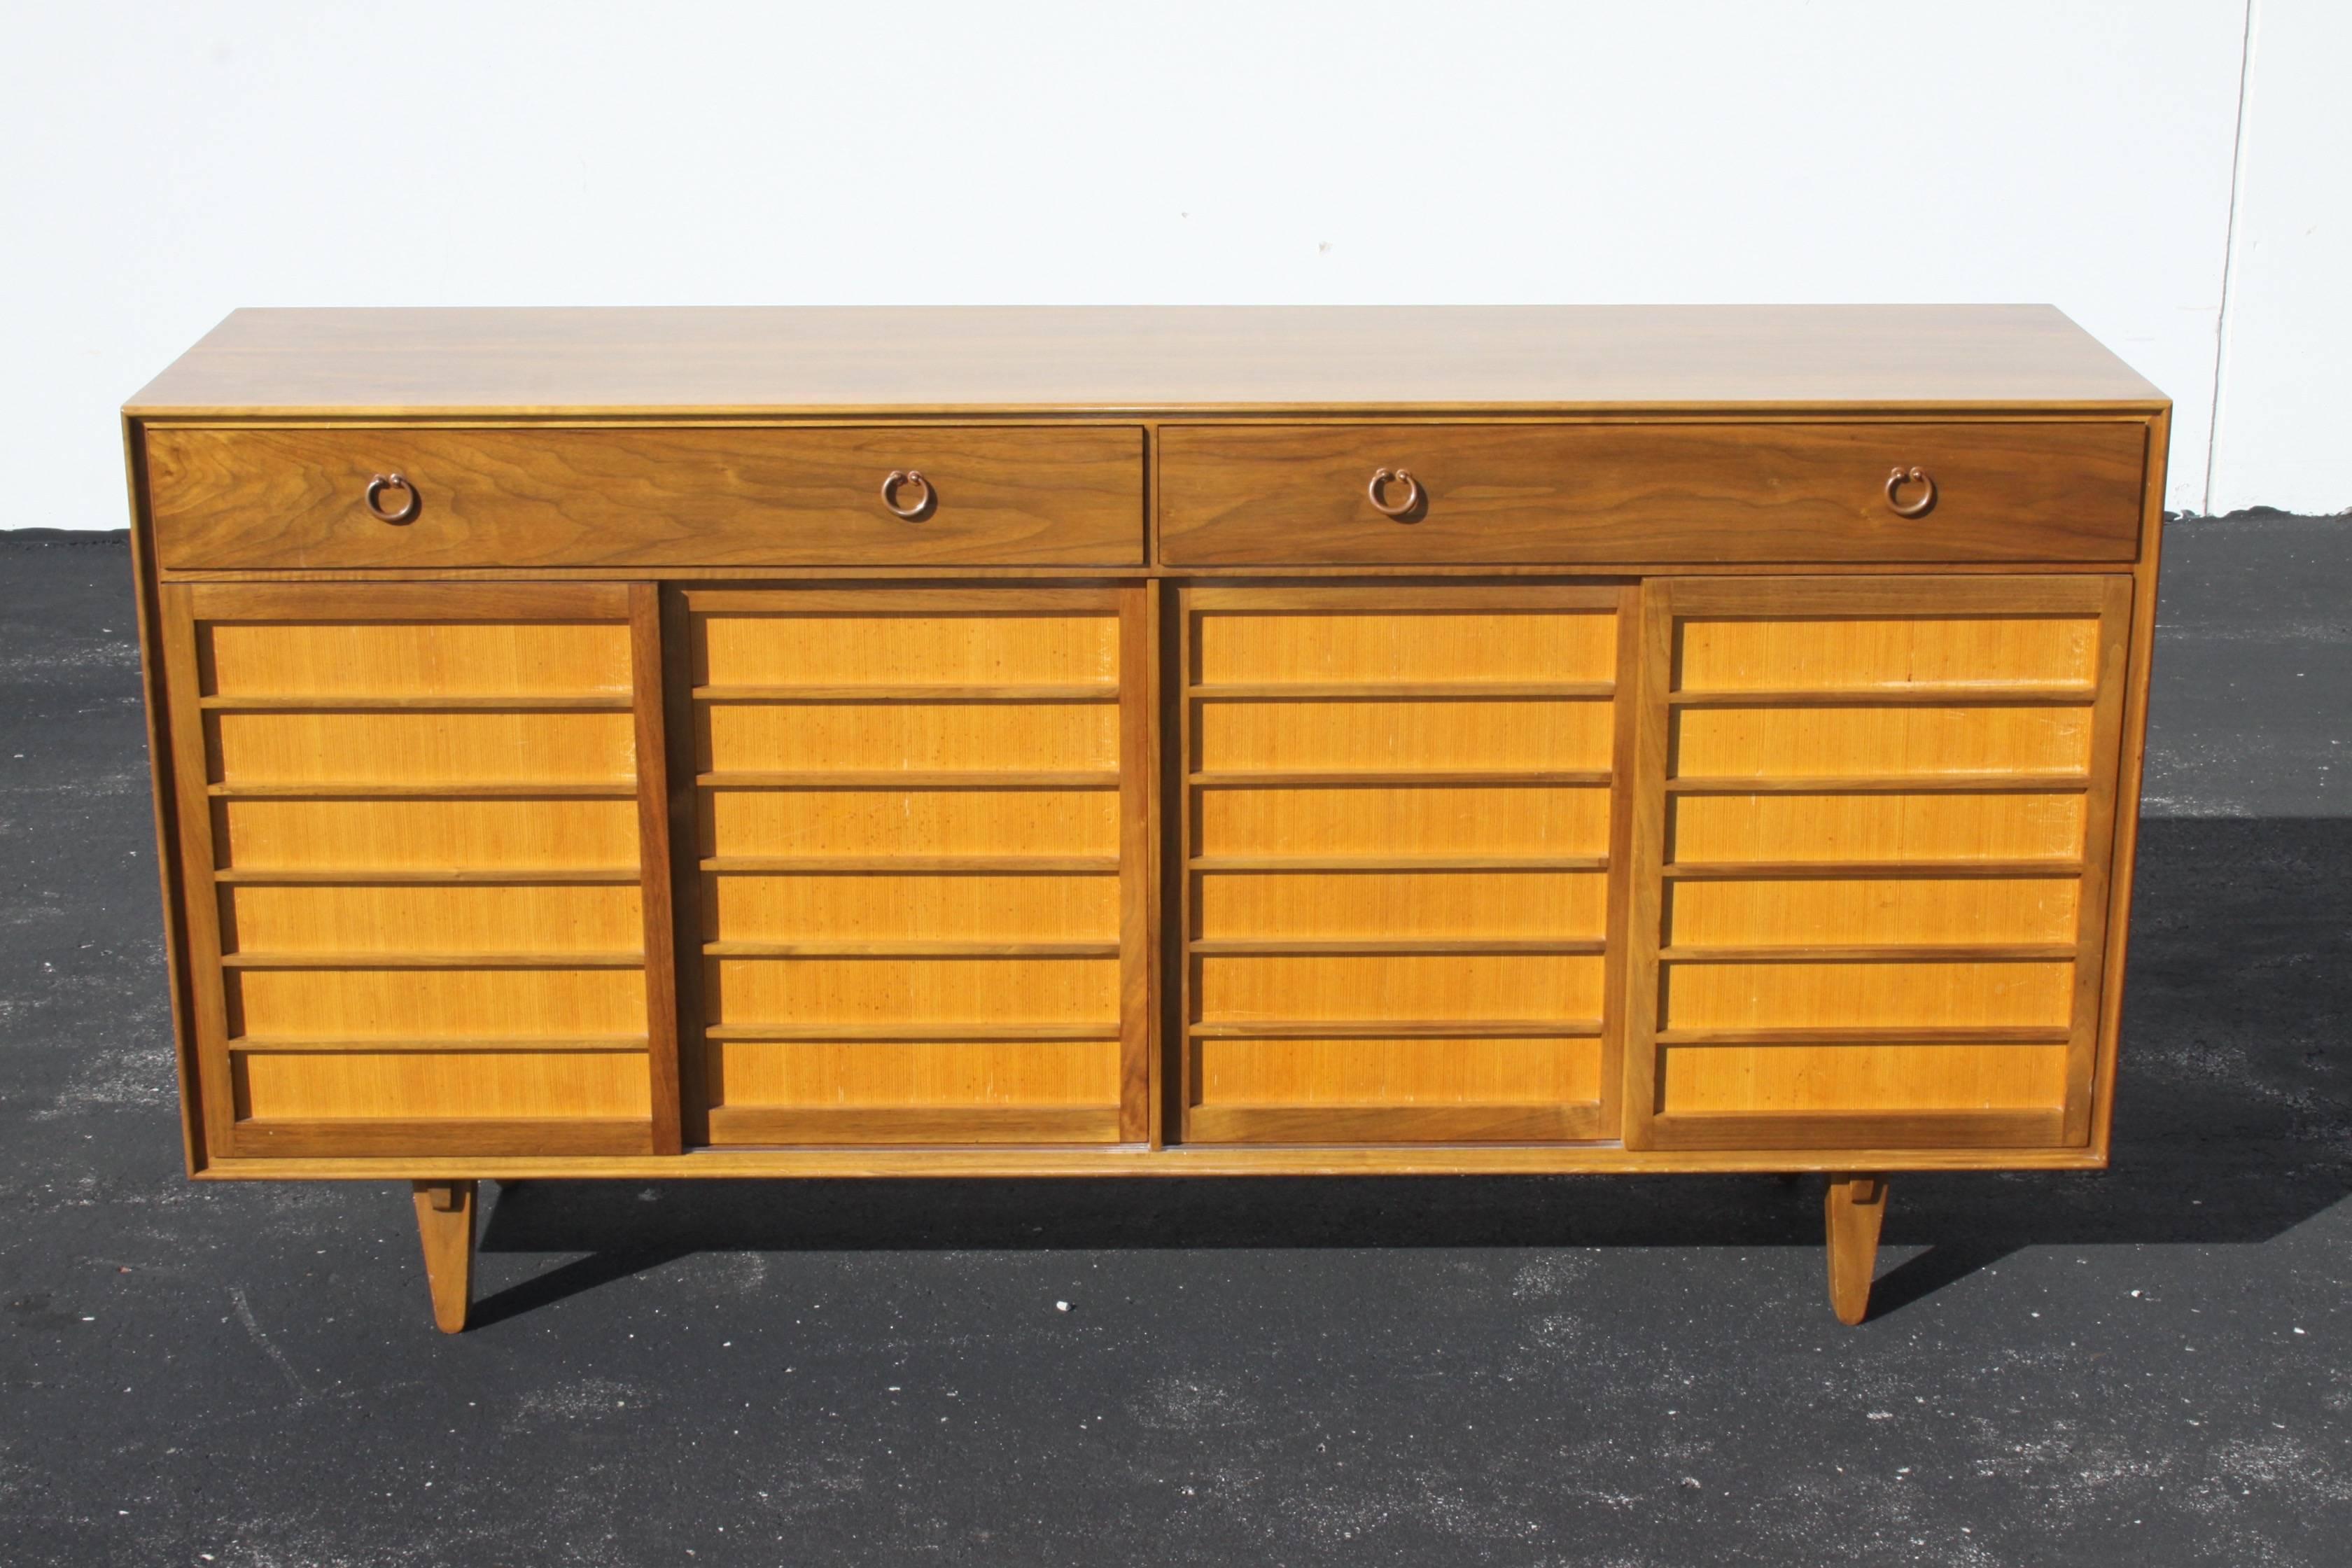 Edward Wormley for Dunbar Japanese influenced sideboard or credenza with beautiful copper forged handles and solid shoji screen style doors. Cabinet is made of walnut, with Japanese pine backed doors. Interior has adjustable clear maple shelves and